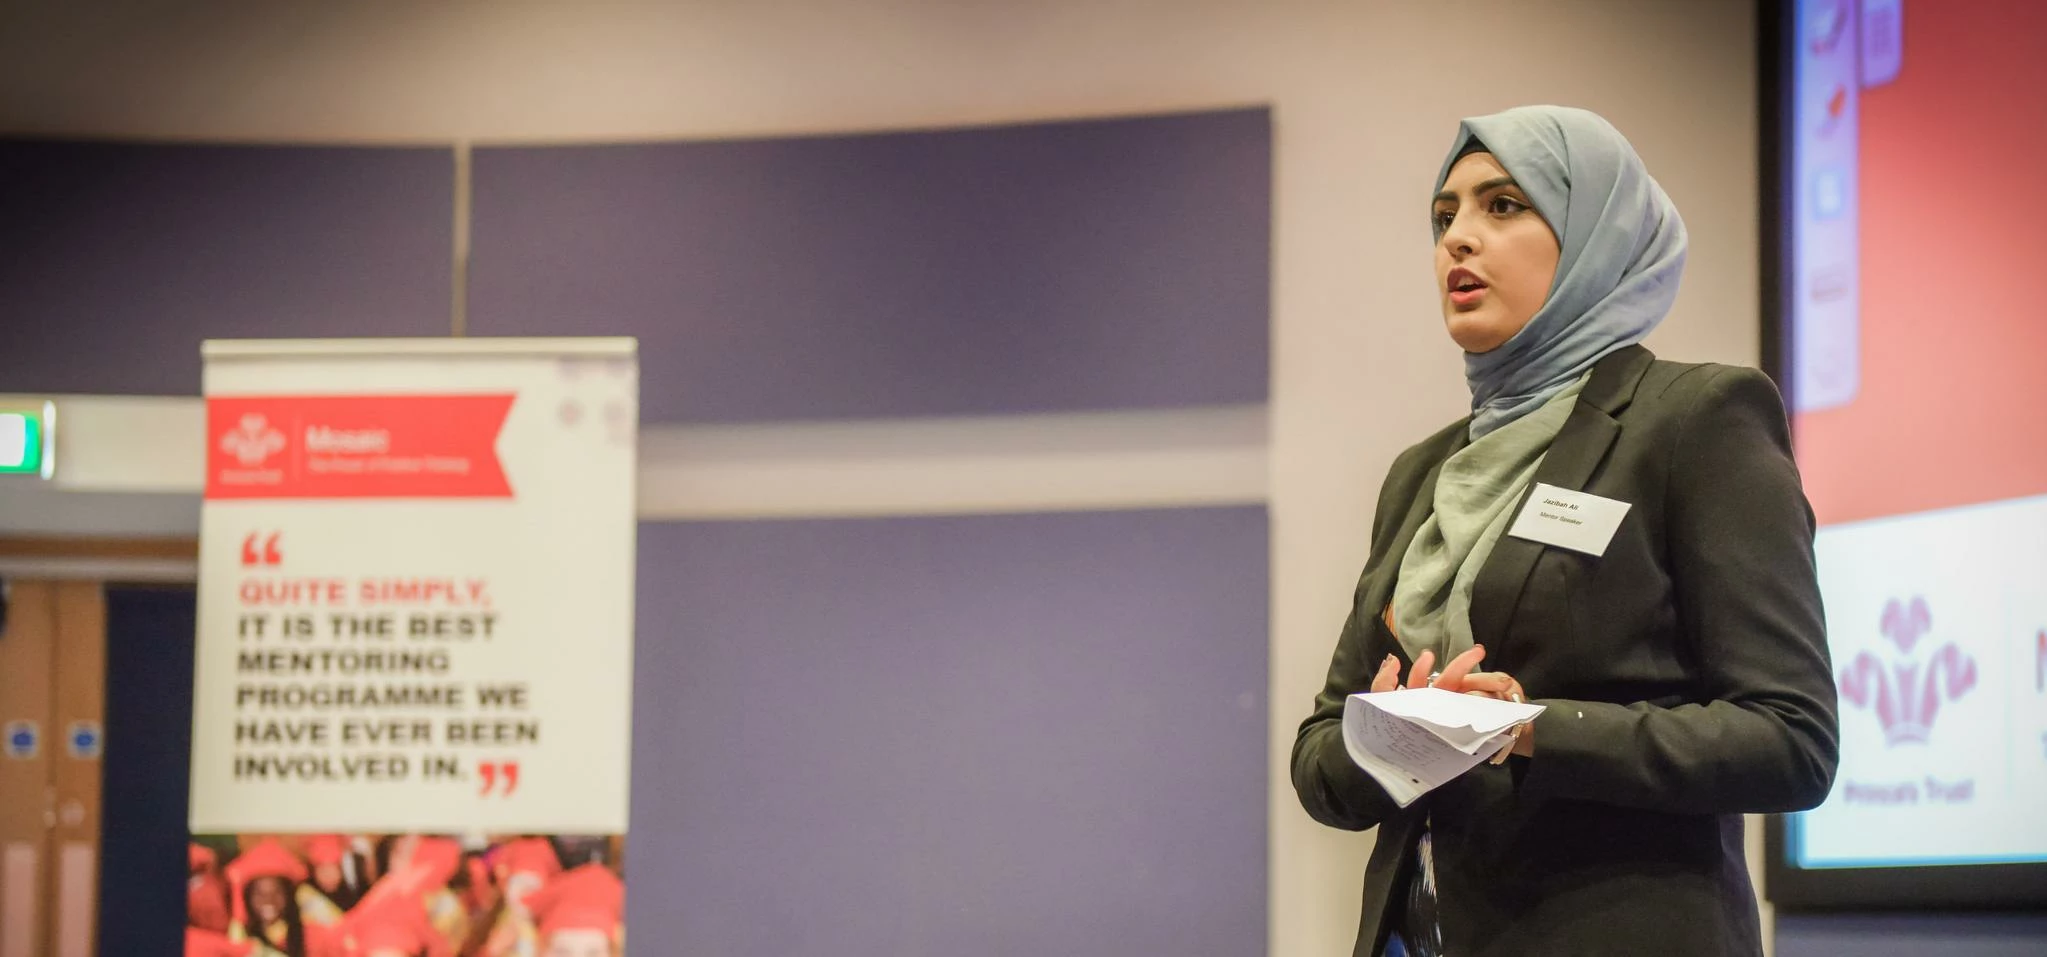 Jazibah Ziarab has been announced as a Young Ambassador for The Prince’s Trust in recognition of her